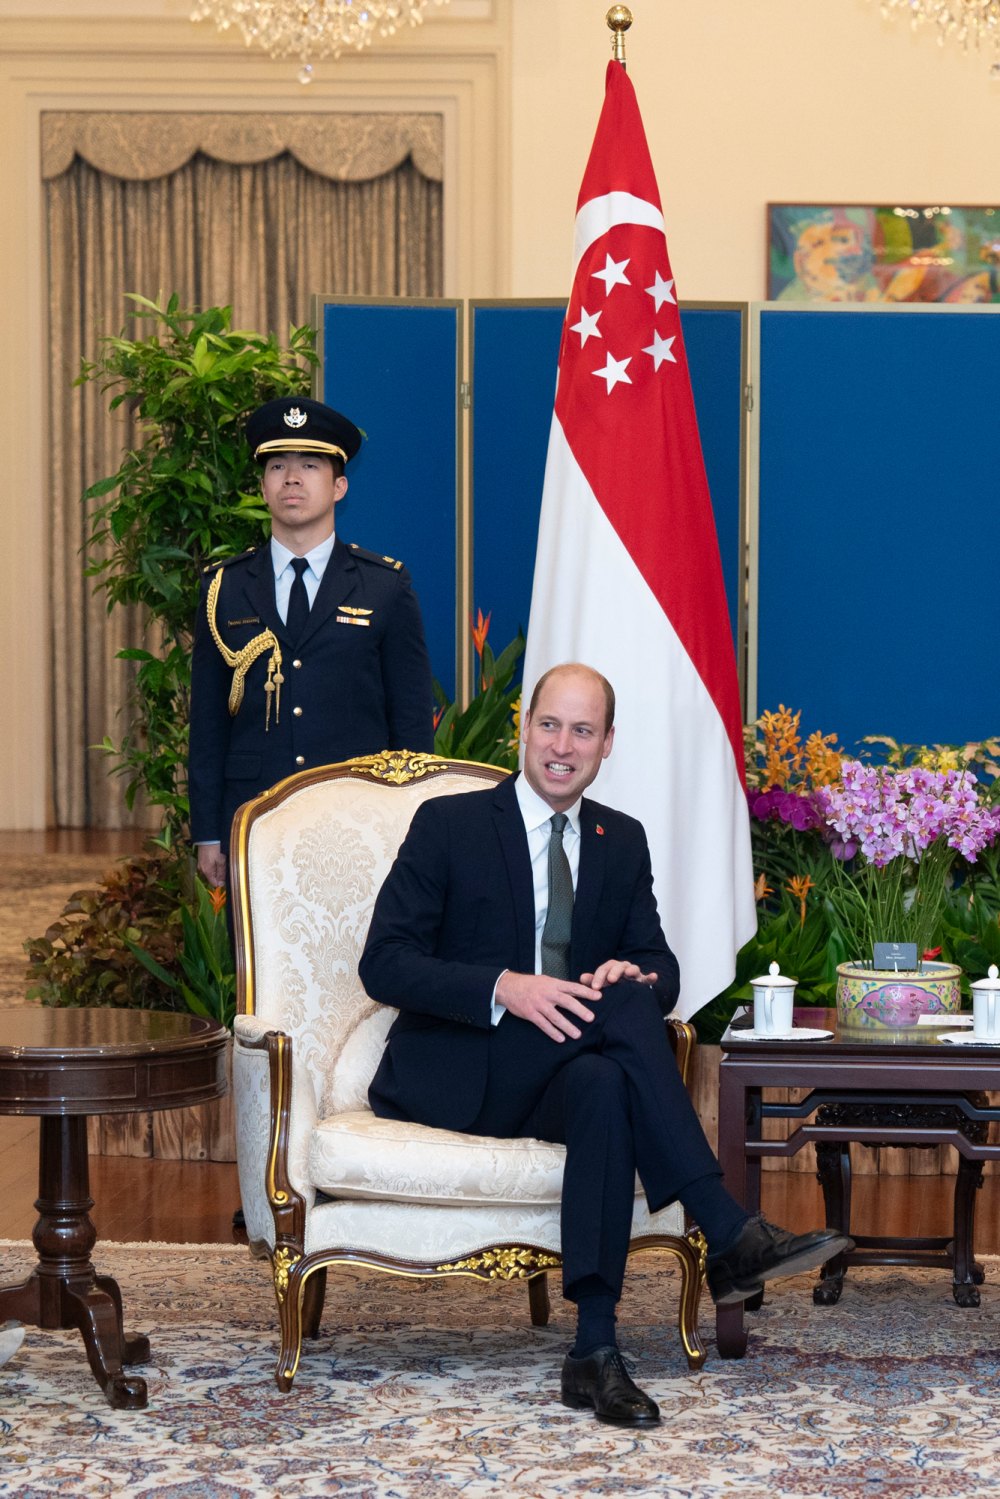 Prince William Reveals Why Kate Middleton Skipped Singapore Trip